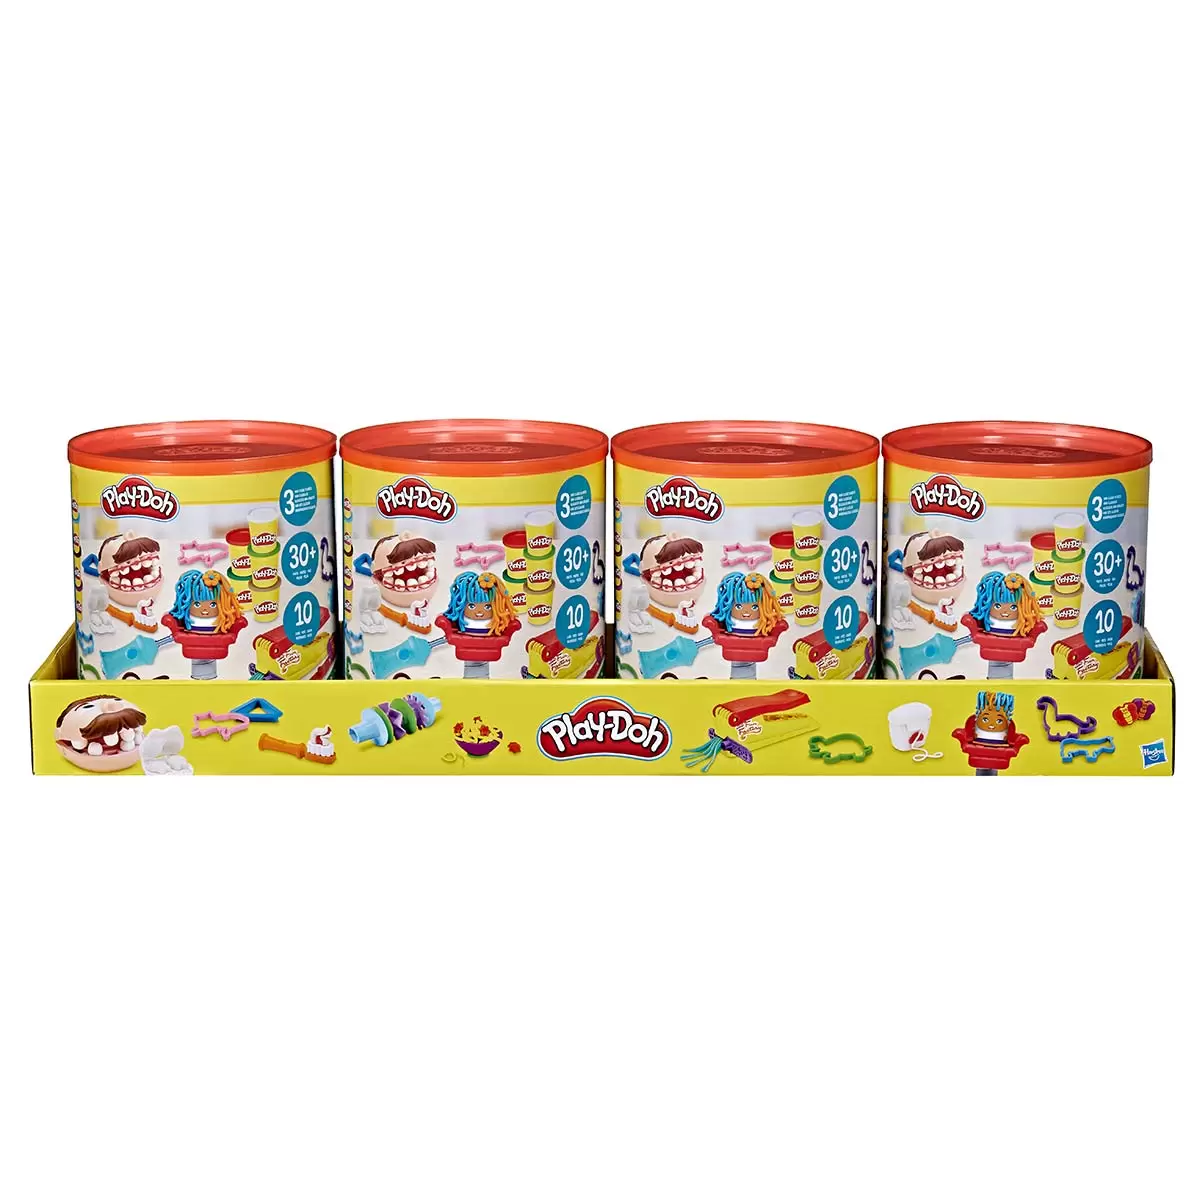 Buy Play Doh Cannister Boxes Image at Costco.co.uk